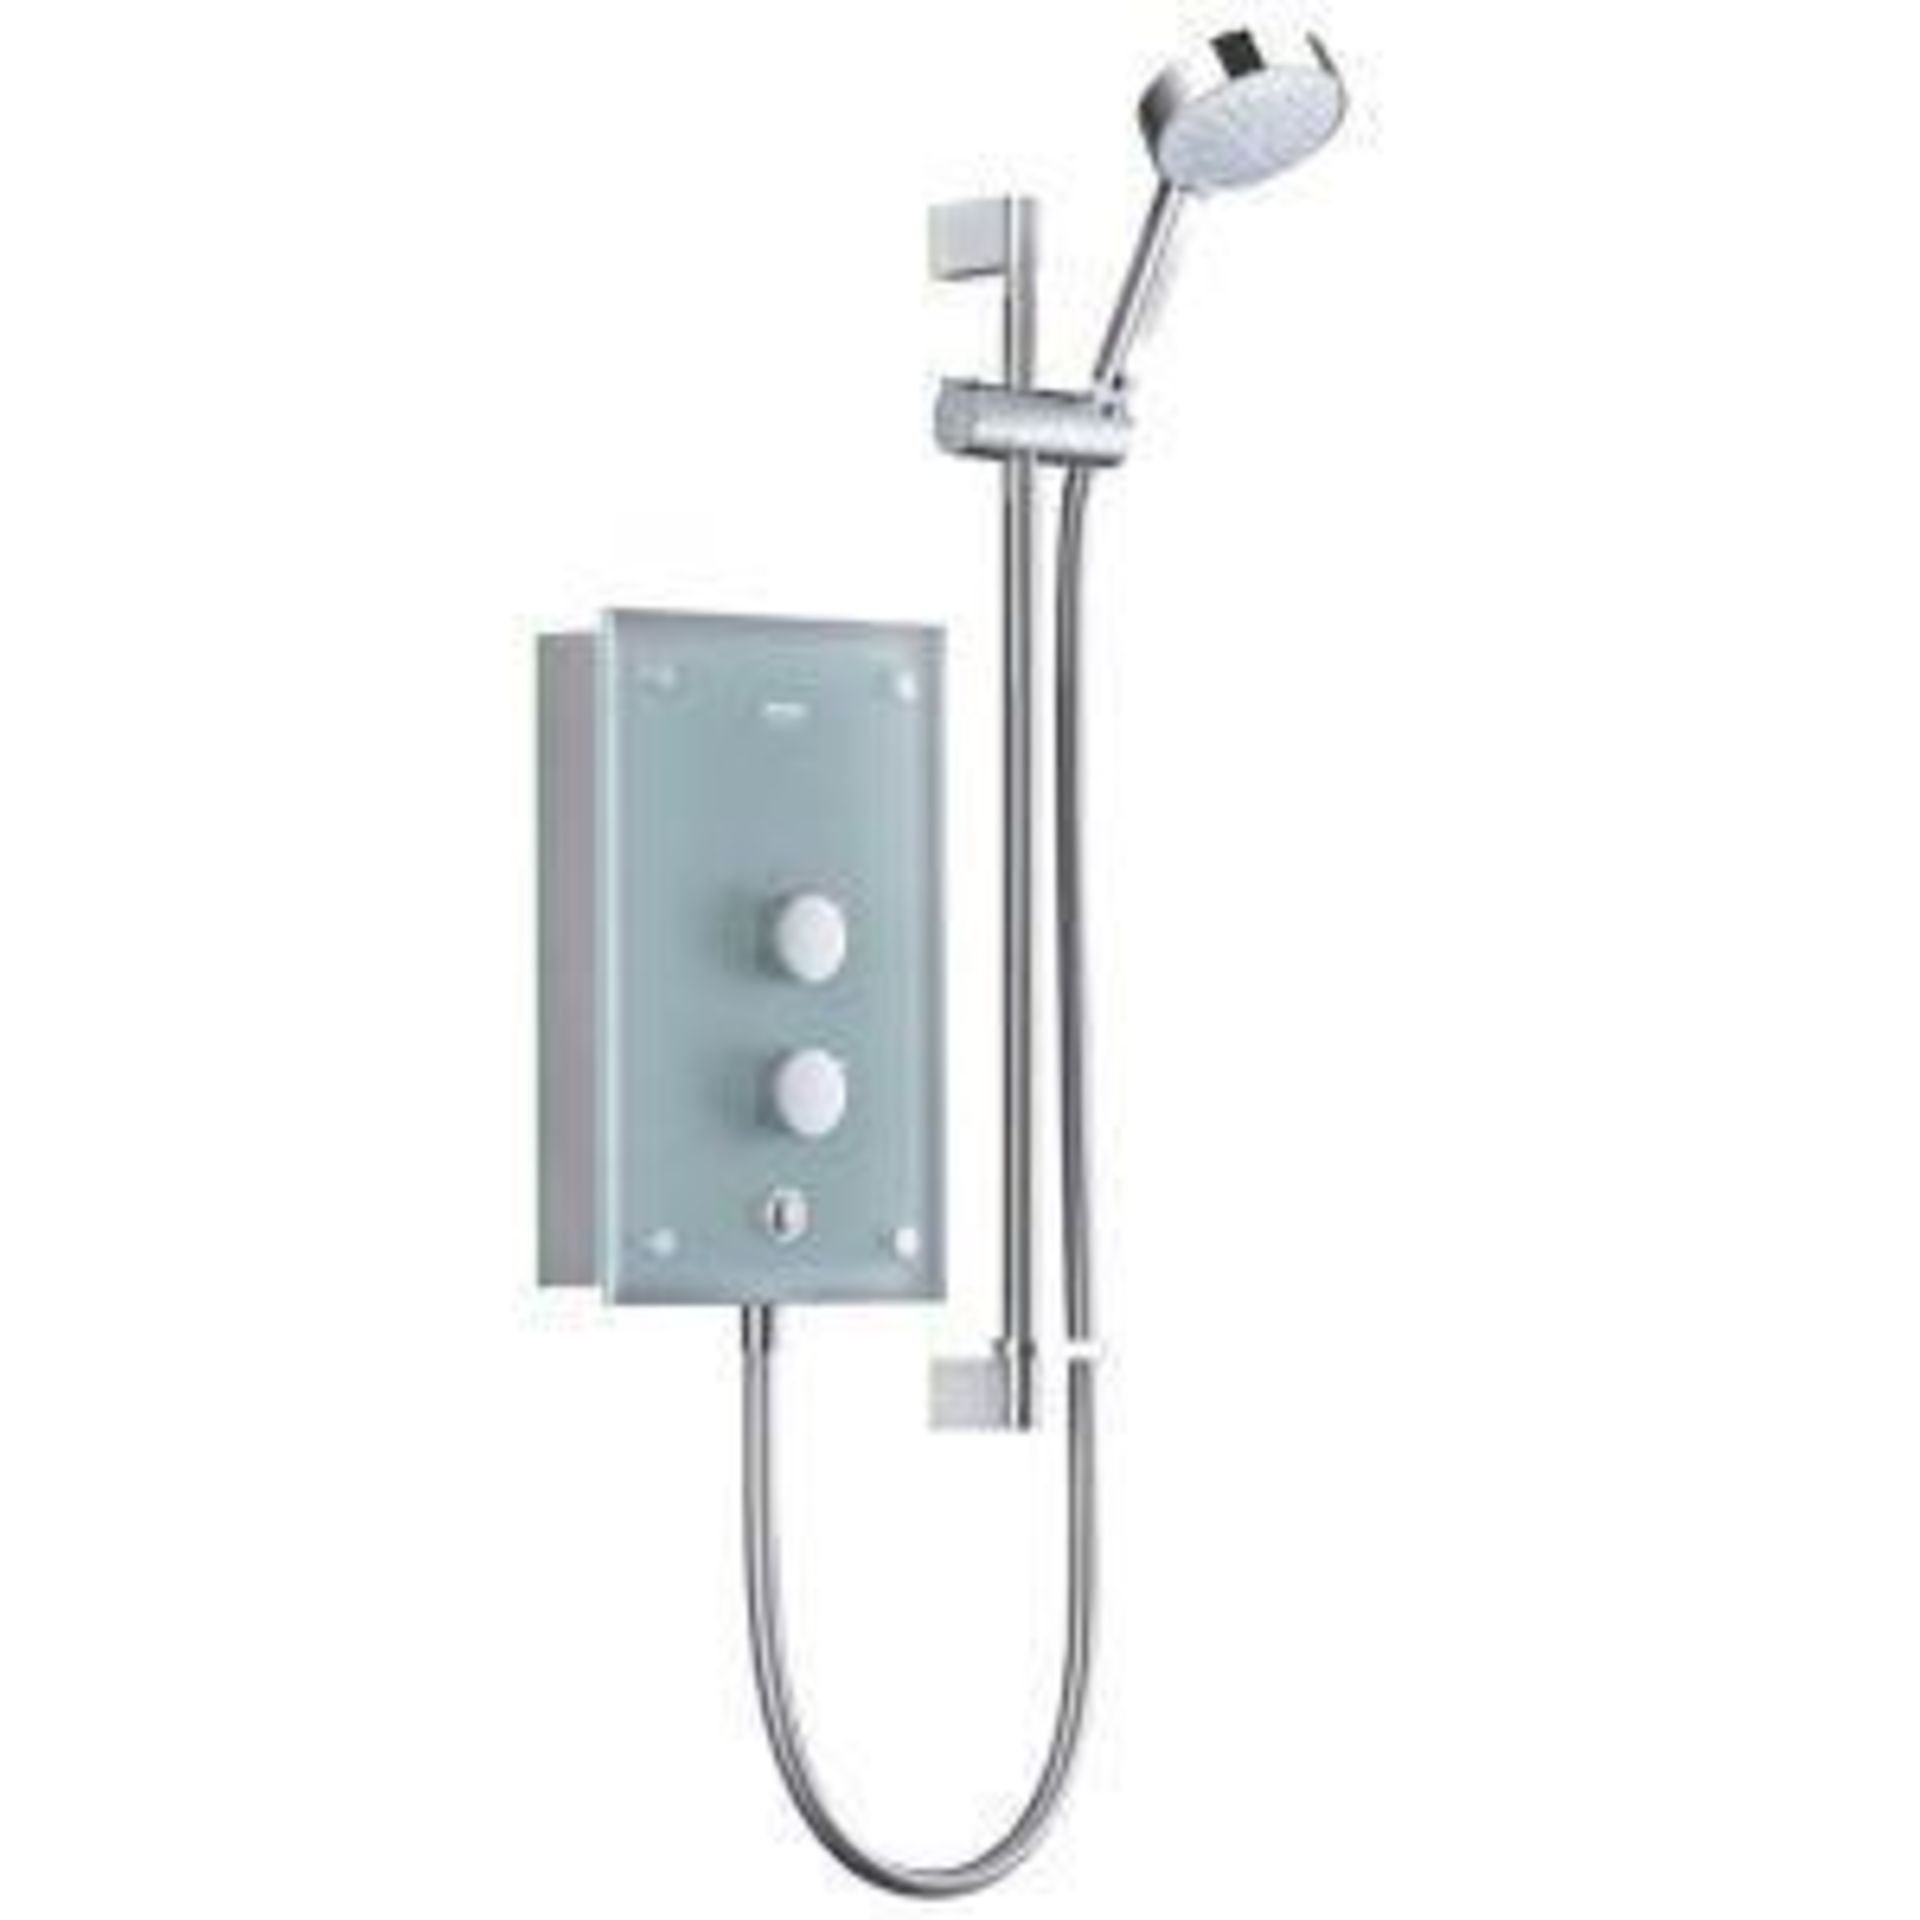 Mira Azora 9.8kW Electric Shower - R14.5Simple frosted glass fascia perfectly complemented by smooth